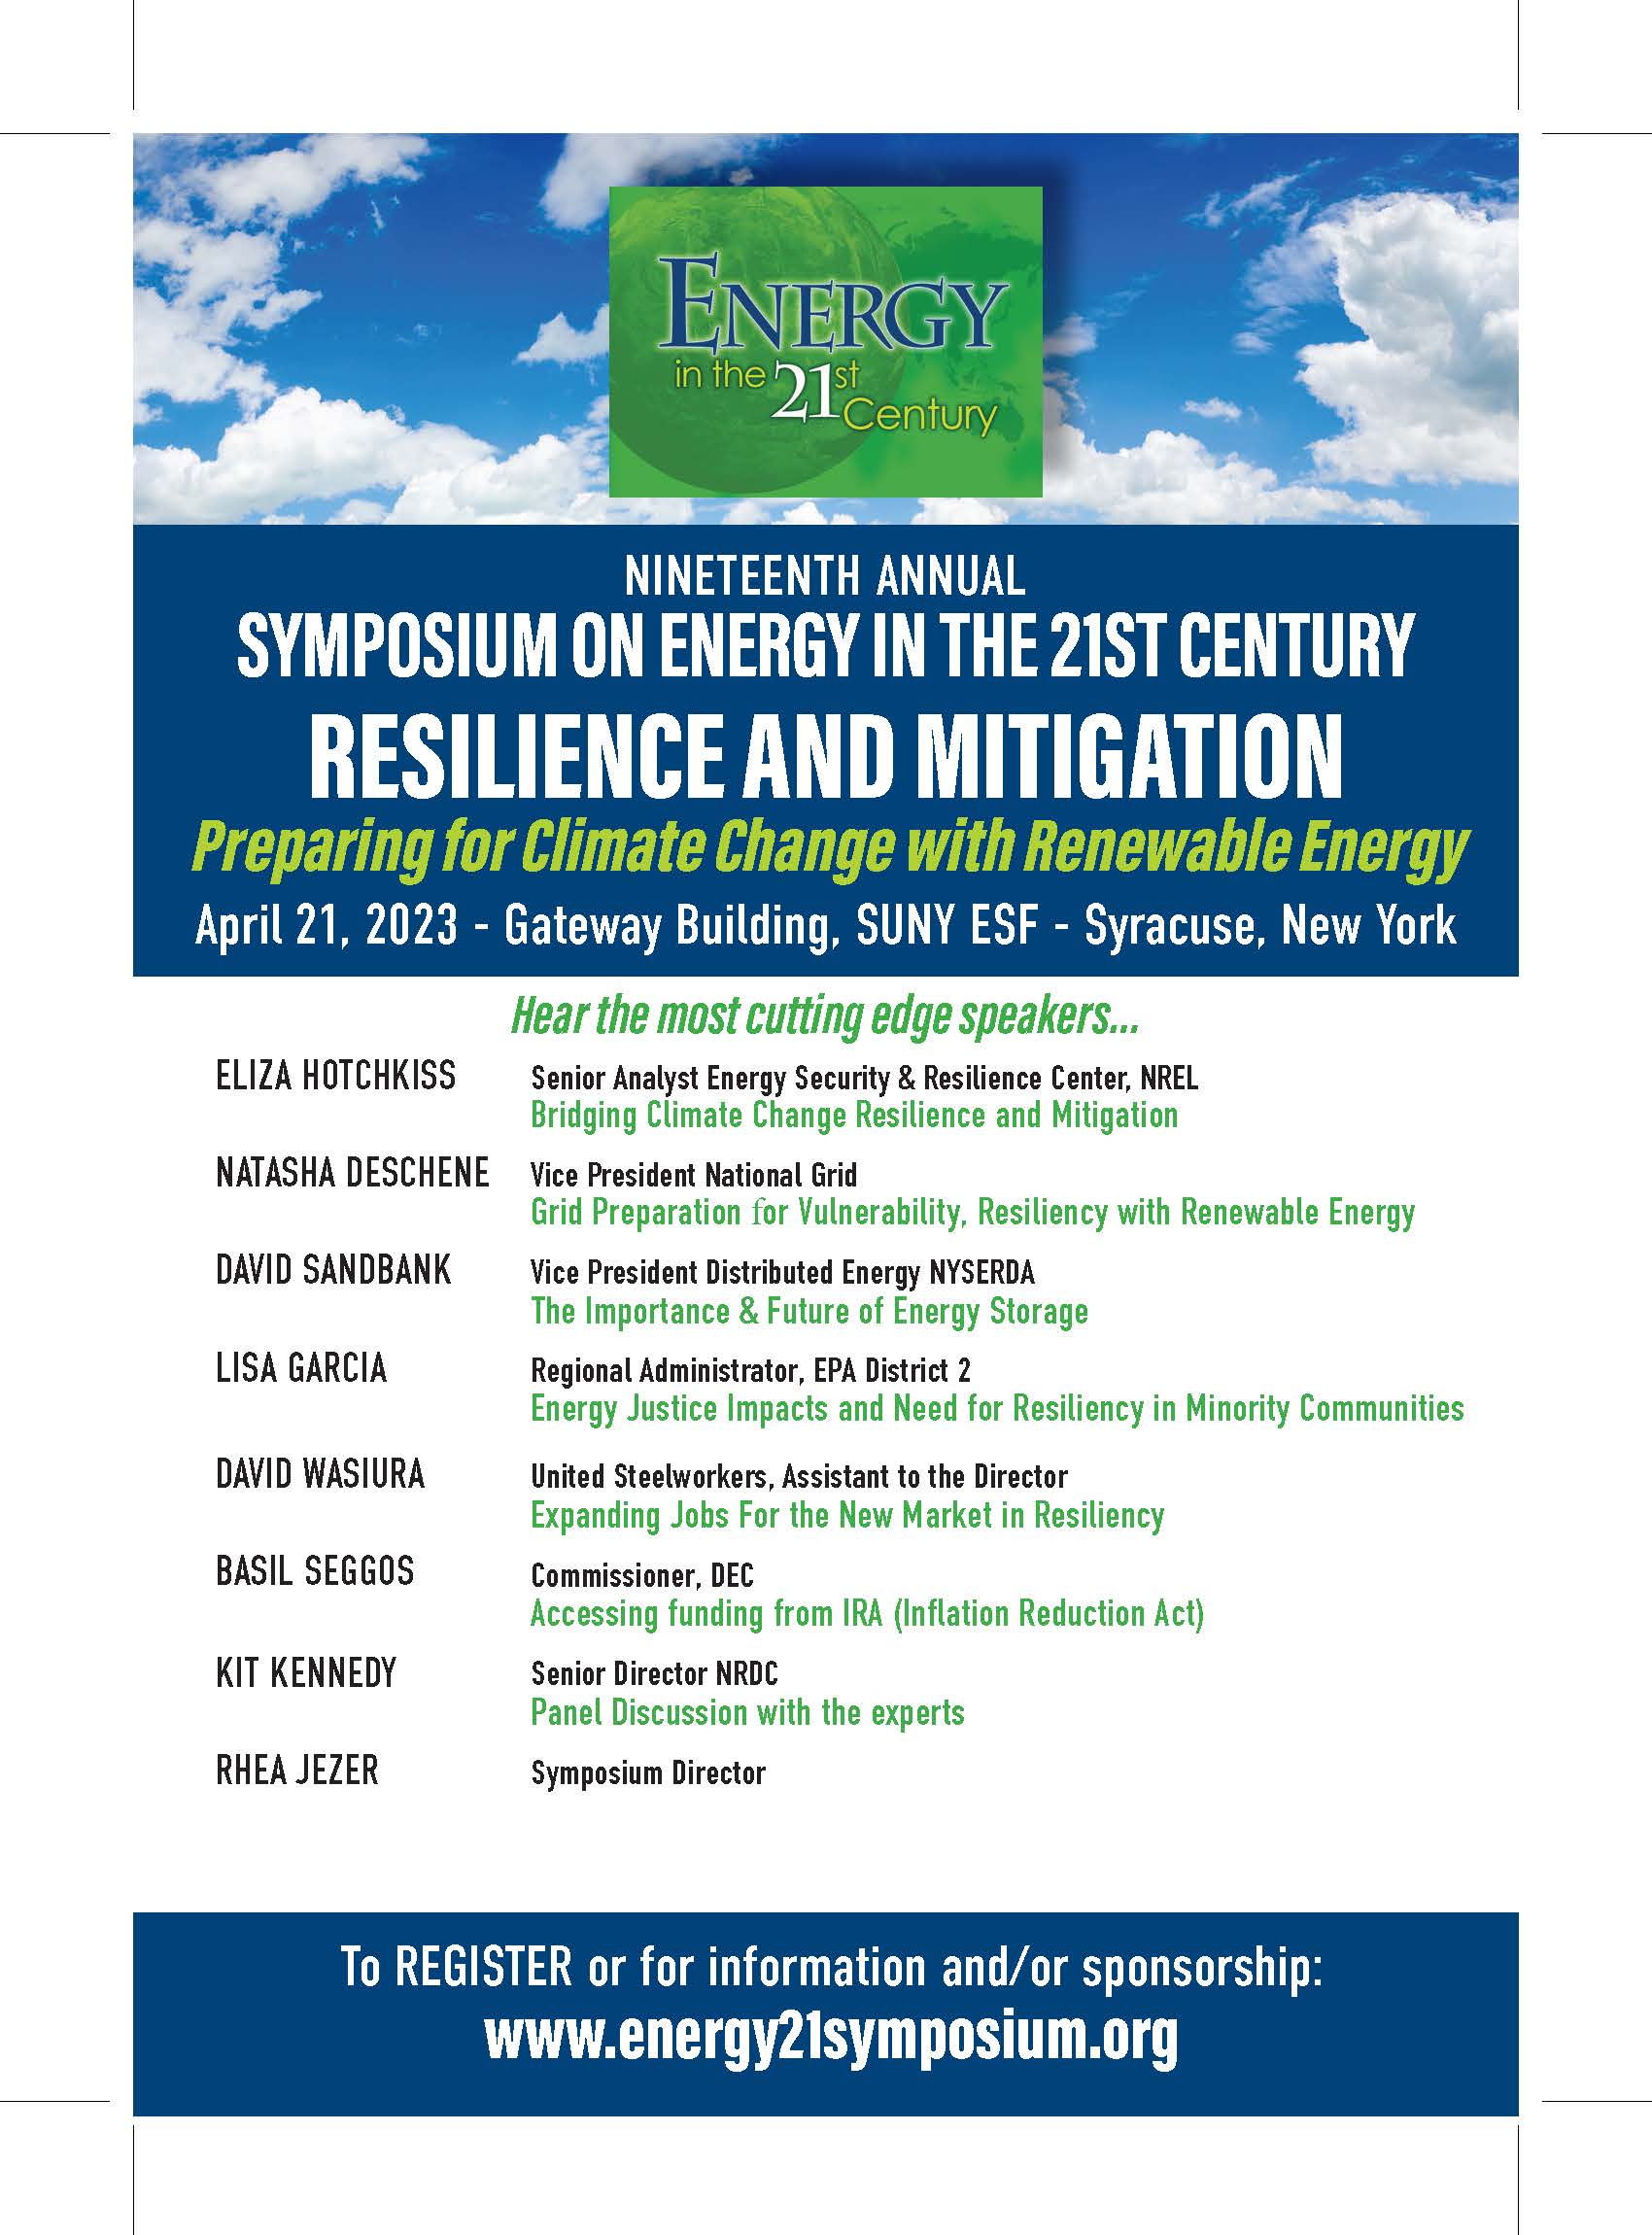 Symposium on Energy in the 21st Century coming April 21st